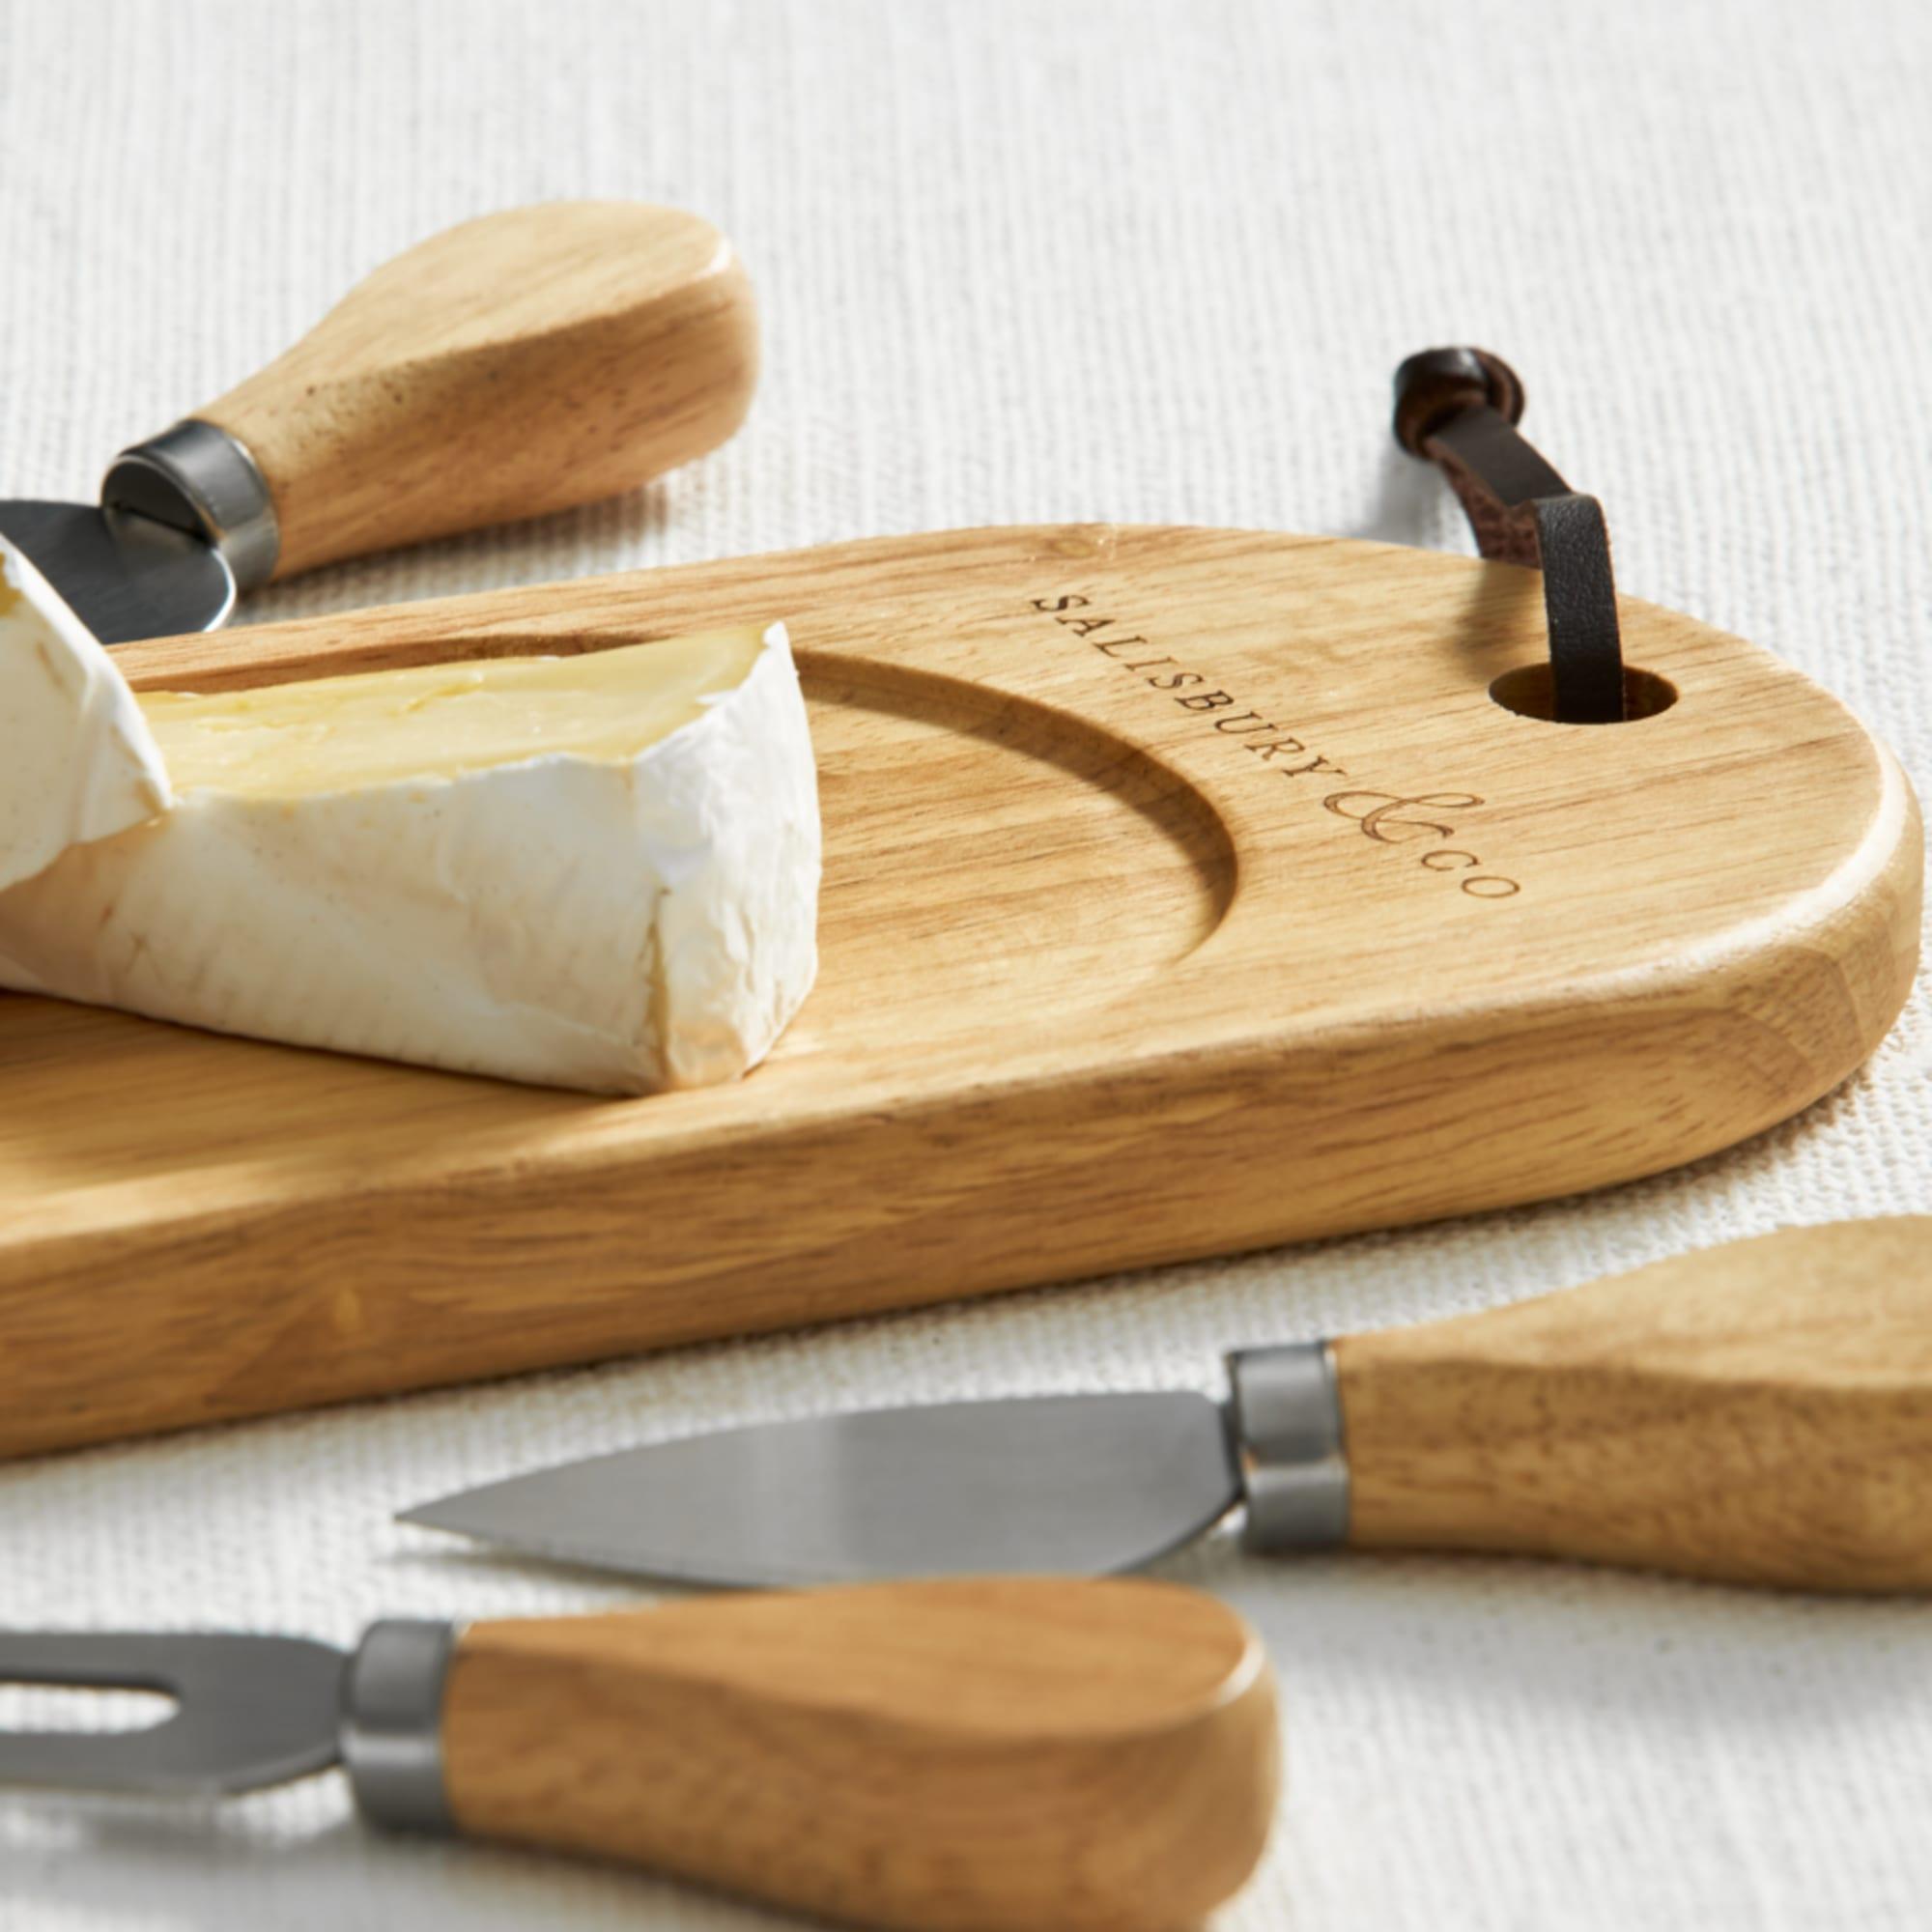 Salisbury & Co Degustation Tasting Cheese Board with Knife Set 4pc Natural Image 4